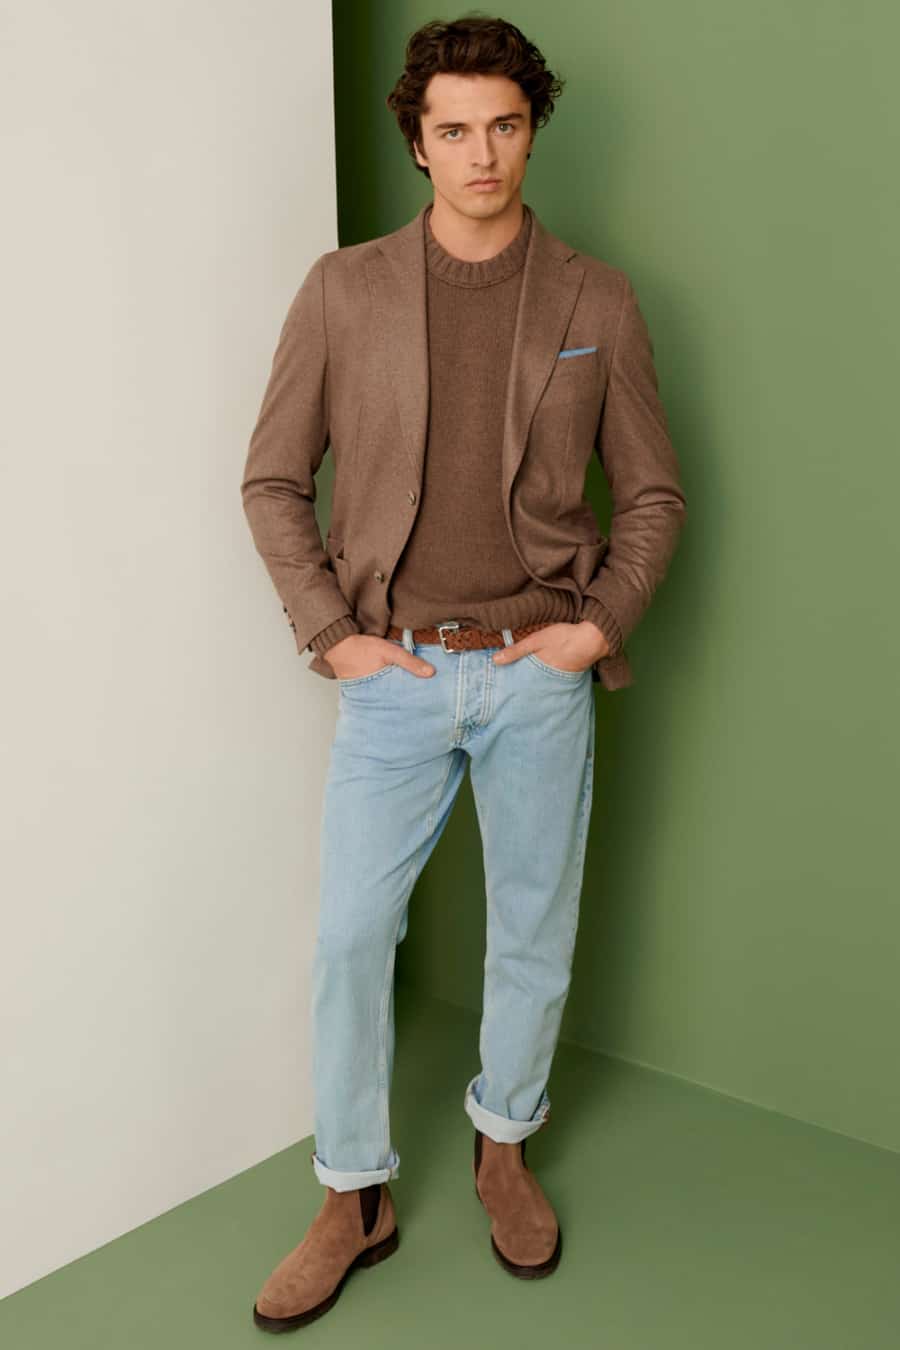 Men's light wash jeans with brown knitted sweater, brown blazer and suede Chelsea boots outfit